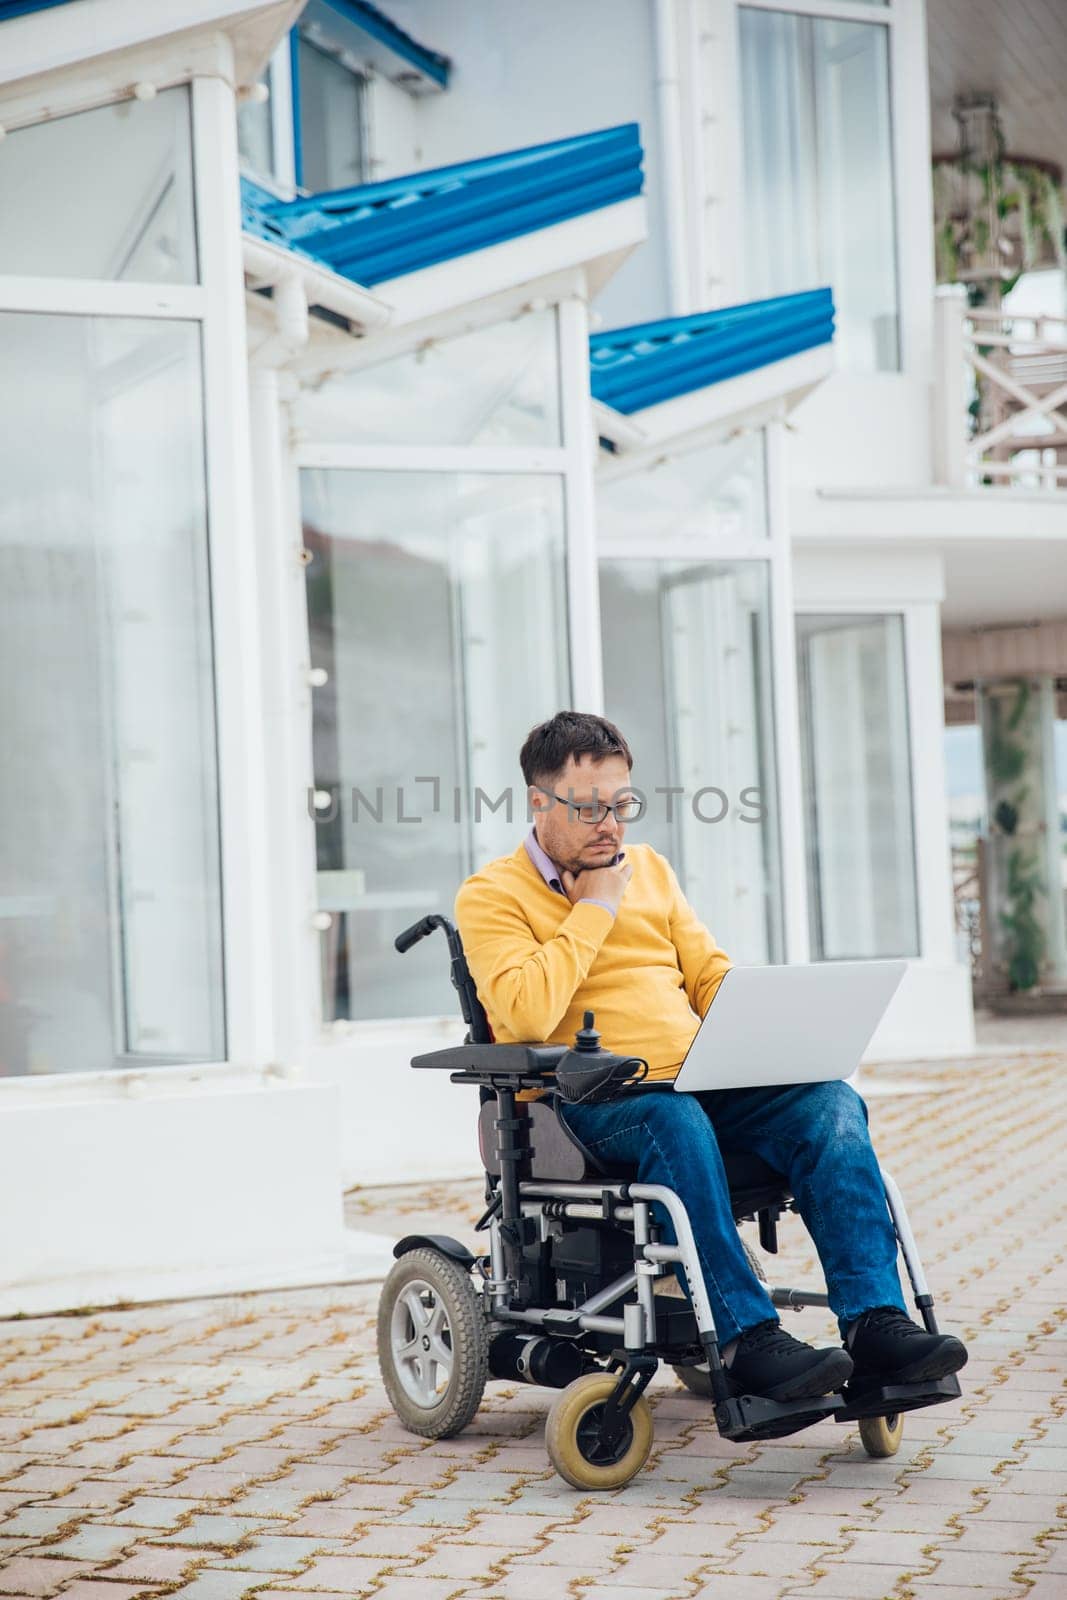 A person with laptop outside a building on the street